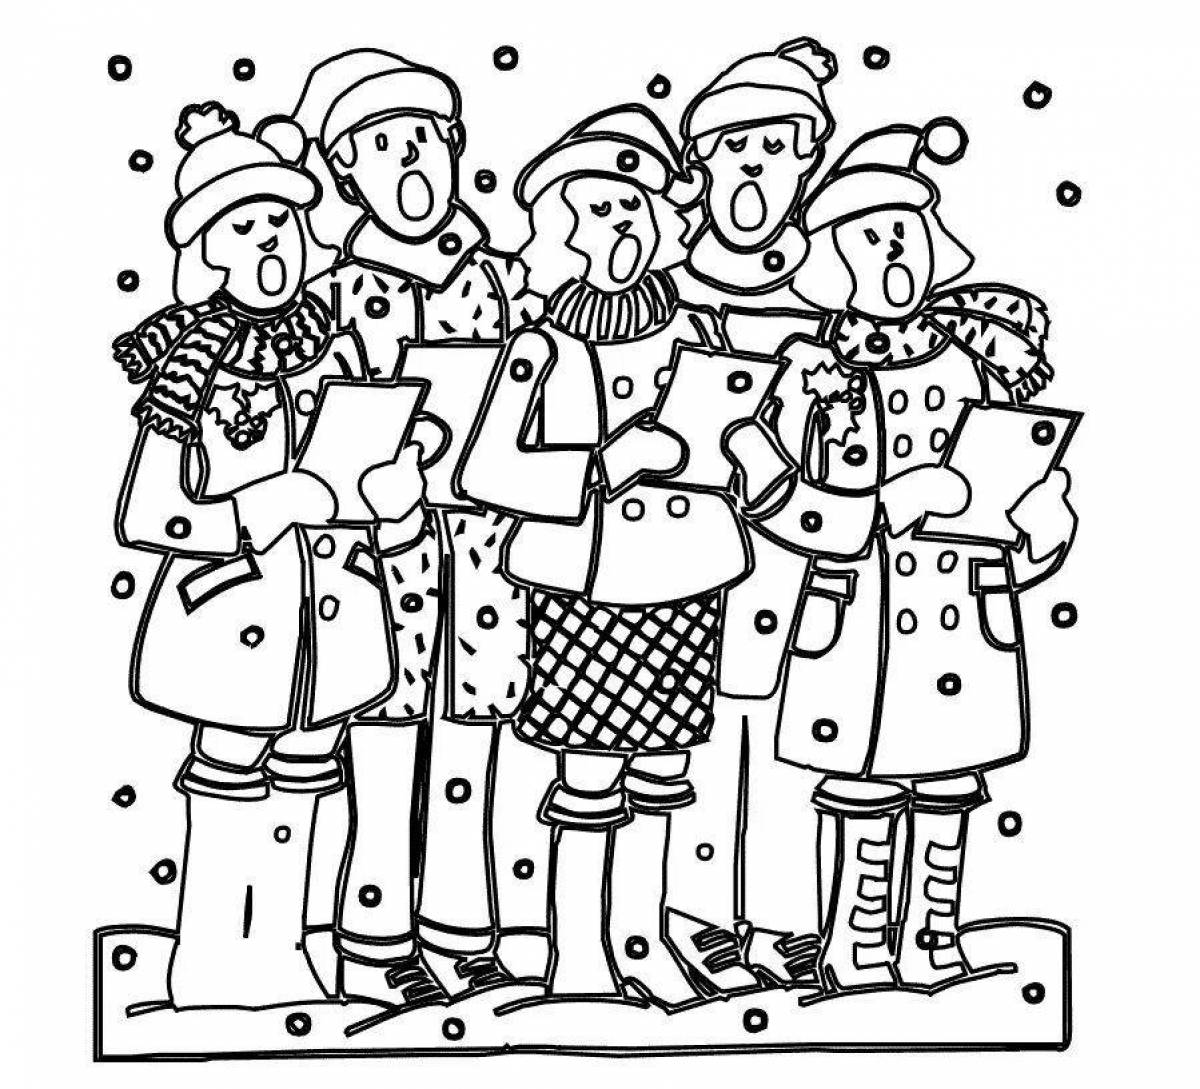 Bright christmas coloring page